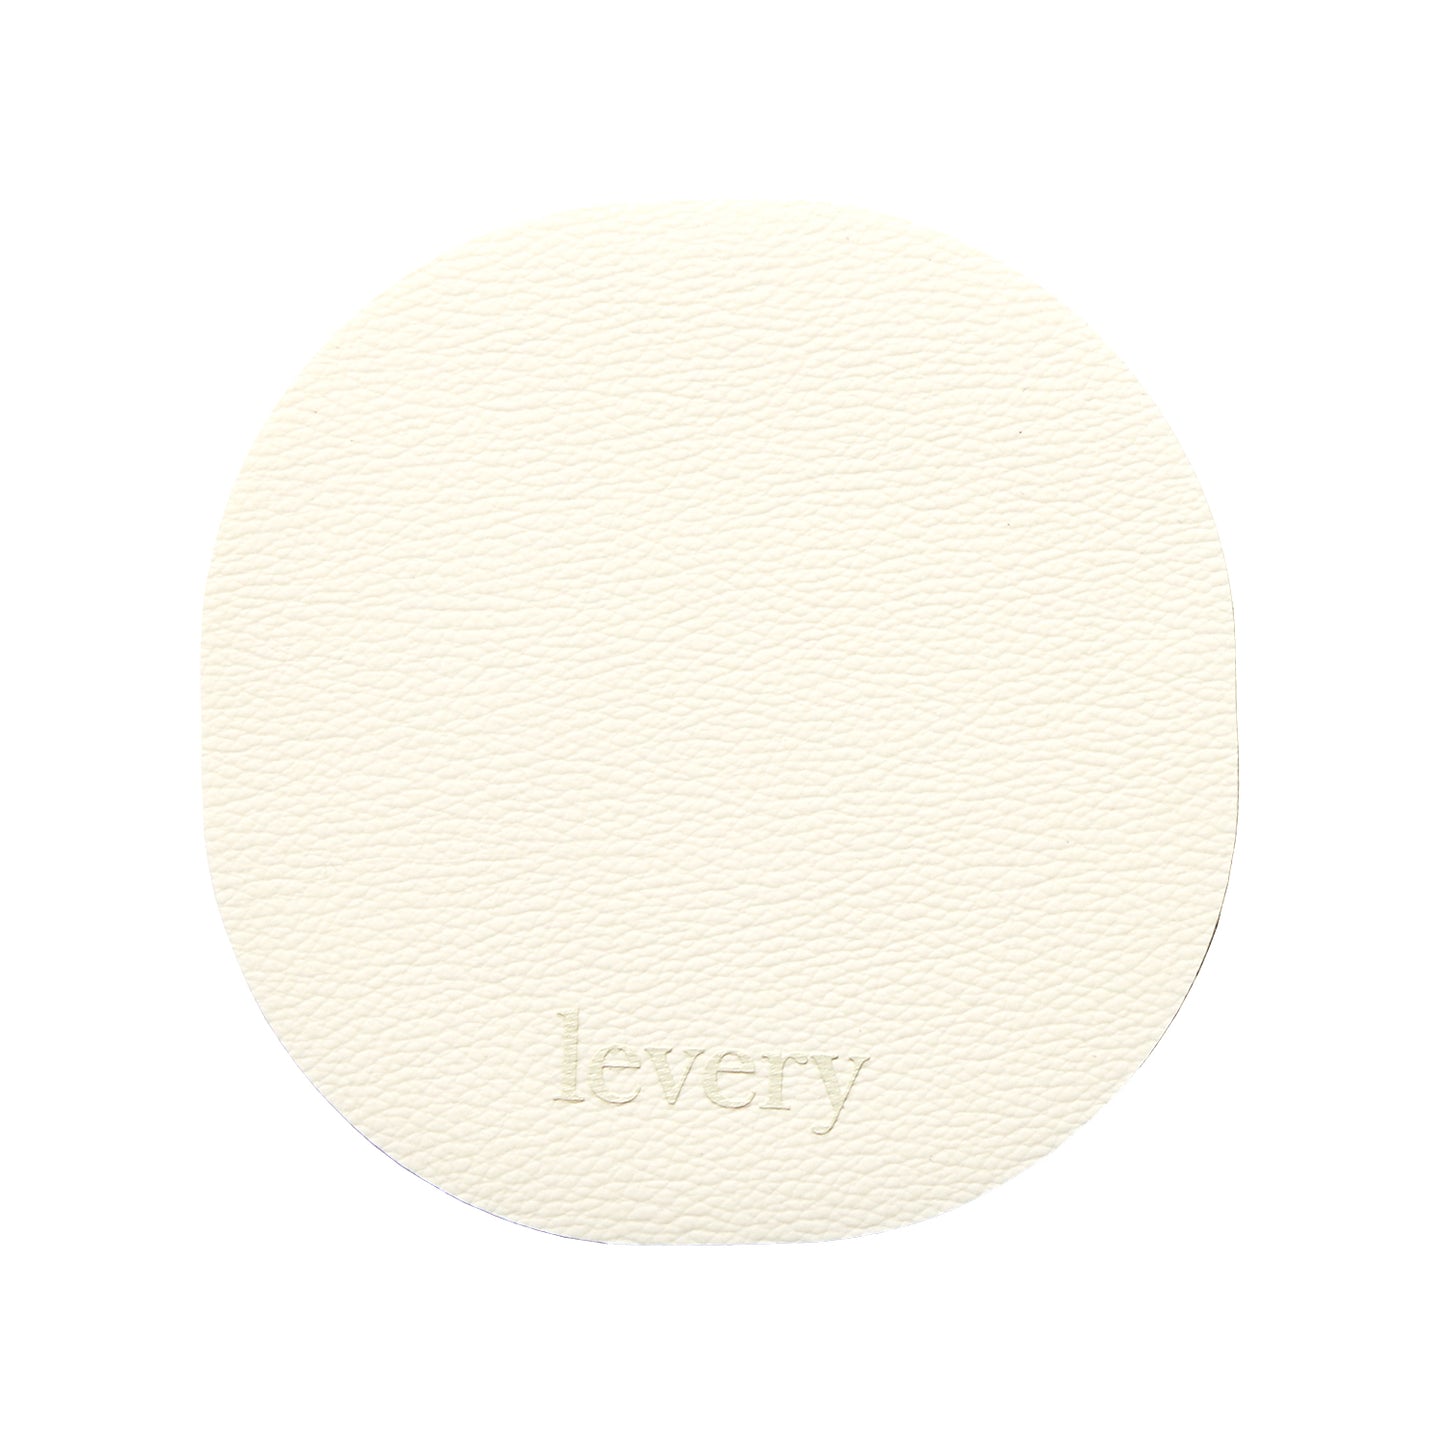 Levery-001C (2 Pack)